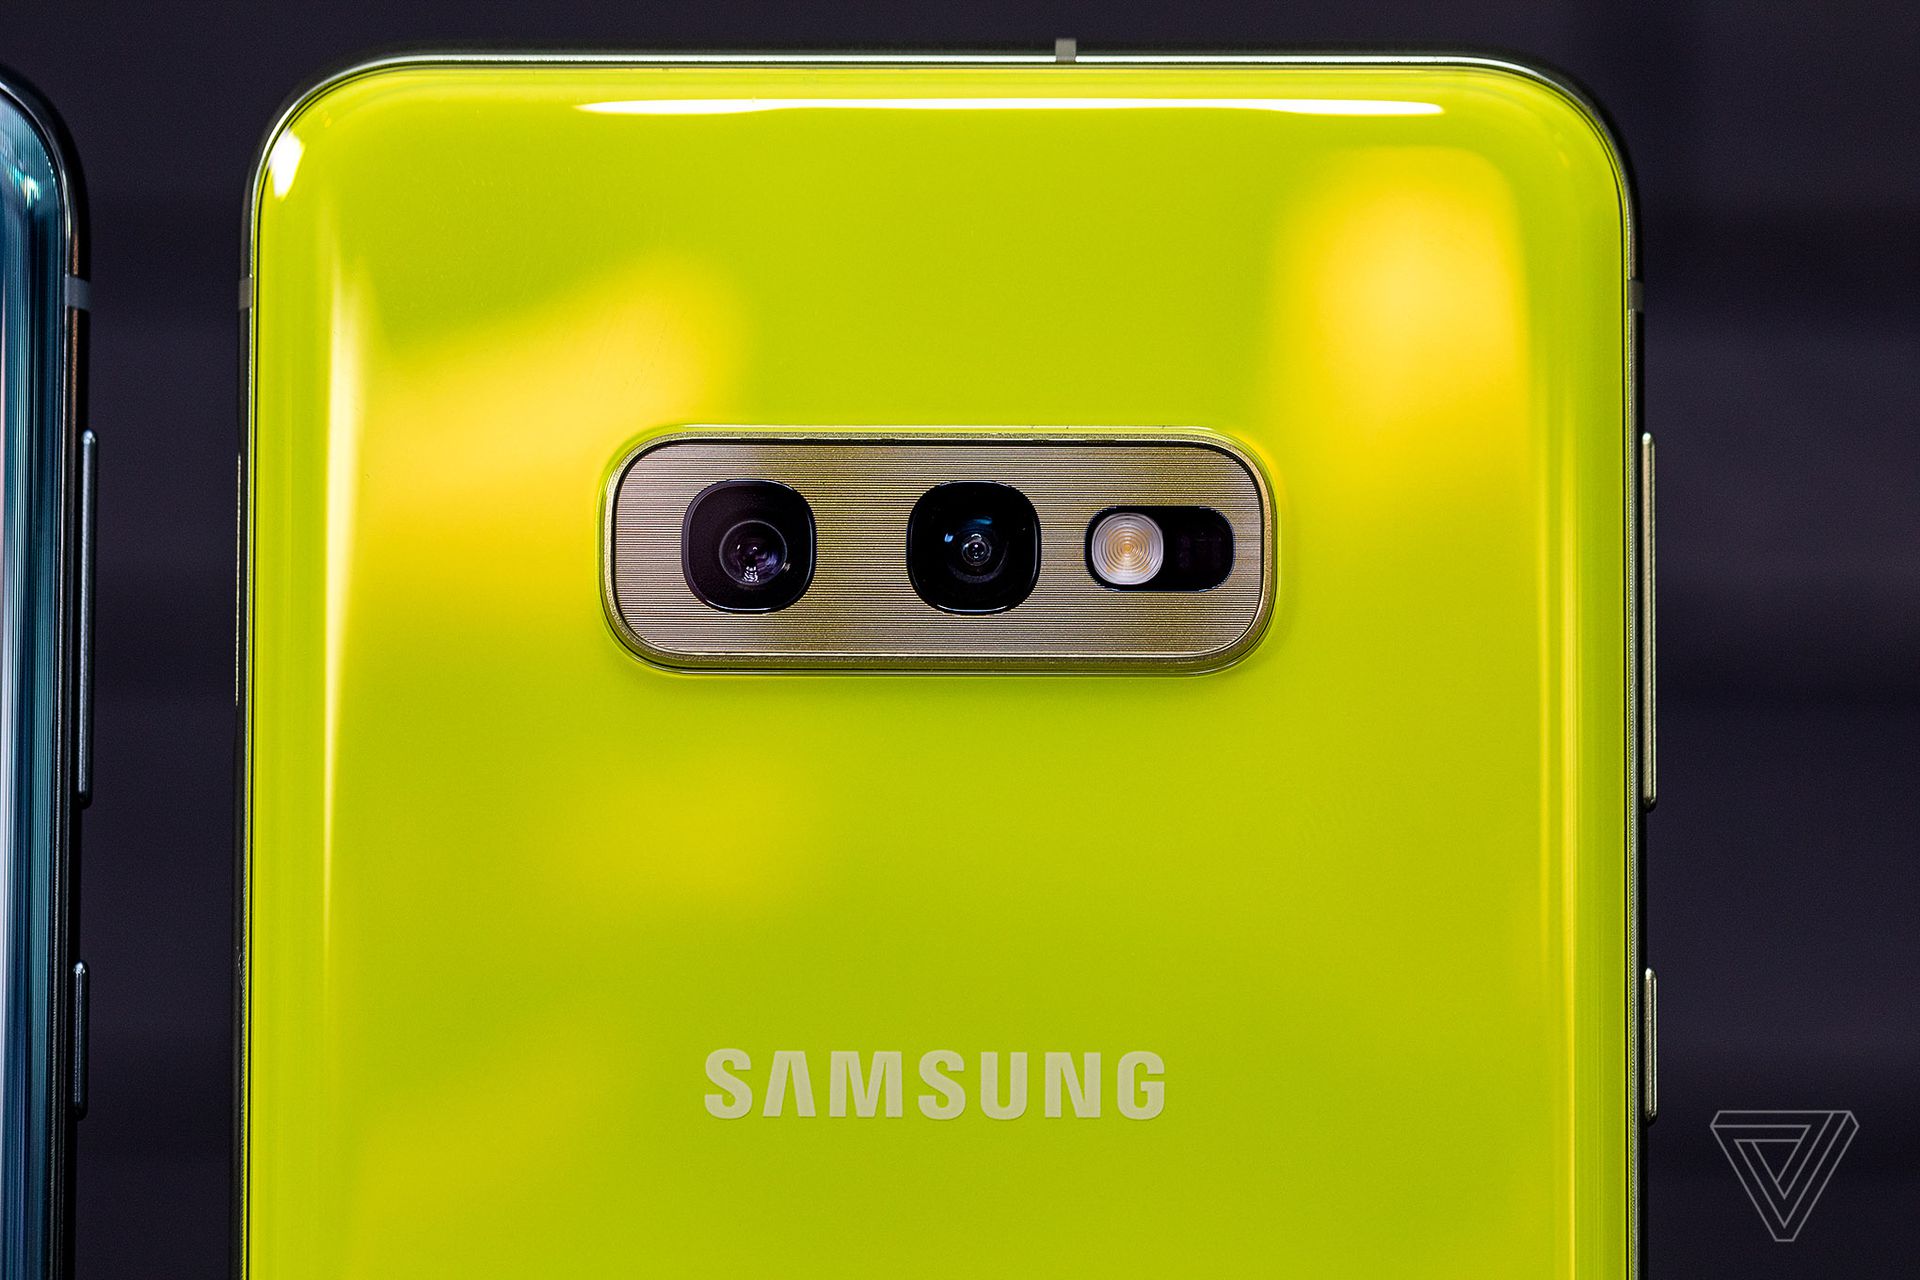 Samsung Galaxy S10e Hands On With The Smaller Cheaper New Phone The Verge 0676